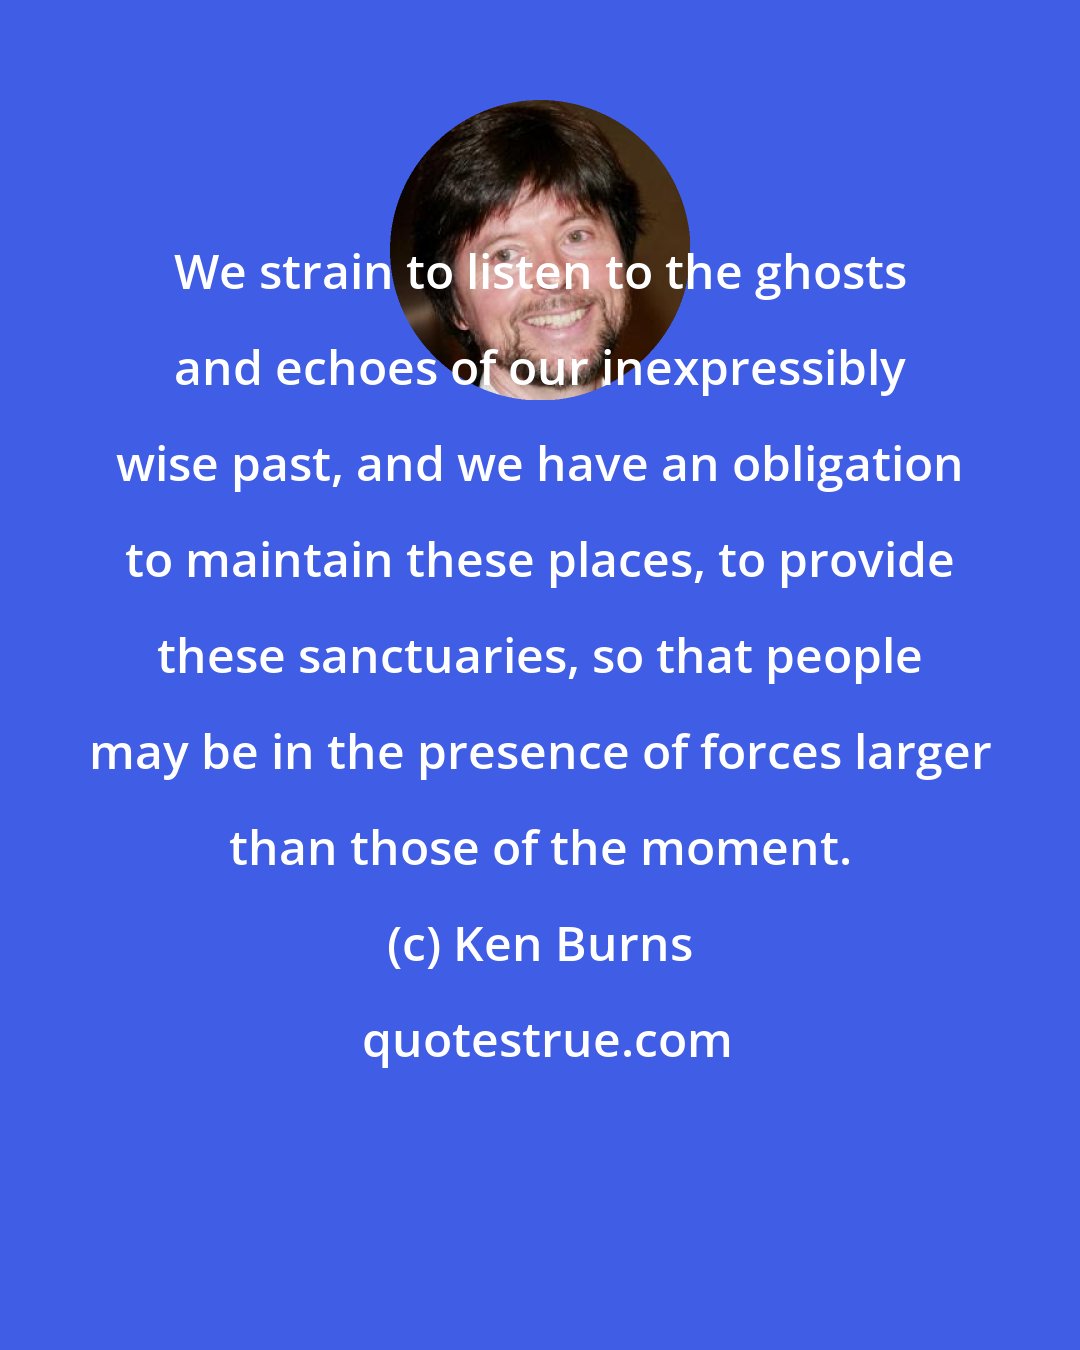 Ken Burns: We strain to listen to the ghosts and echoes of our inexpressibly wise past, and we have an obligation to maintain these places, to provide these sanctuaries, so that people may be in the presence of forces larger than those of the moment.